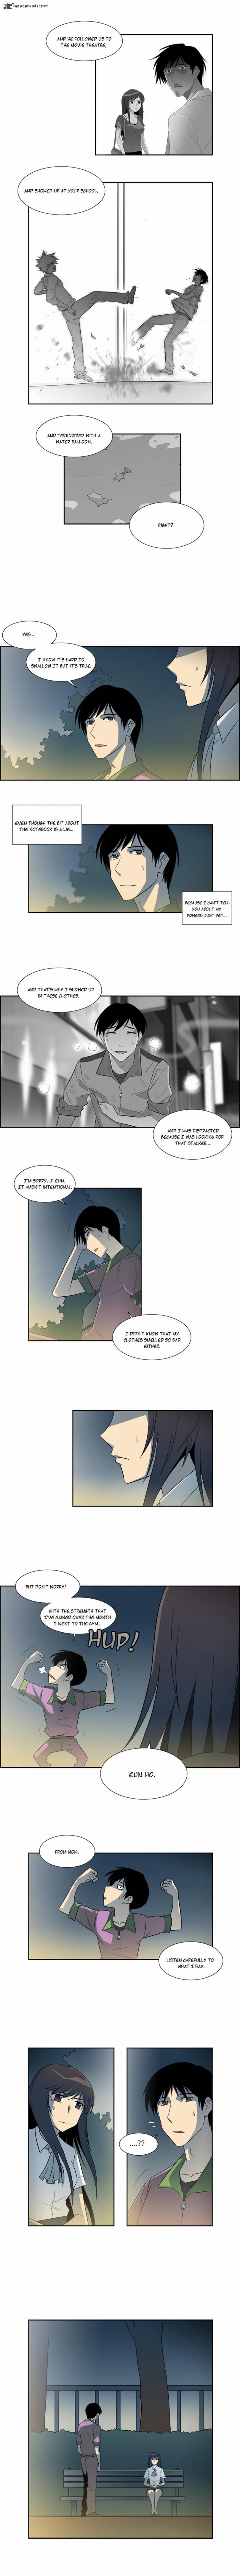 Melo Holic Chapter 23 Page 5